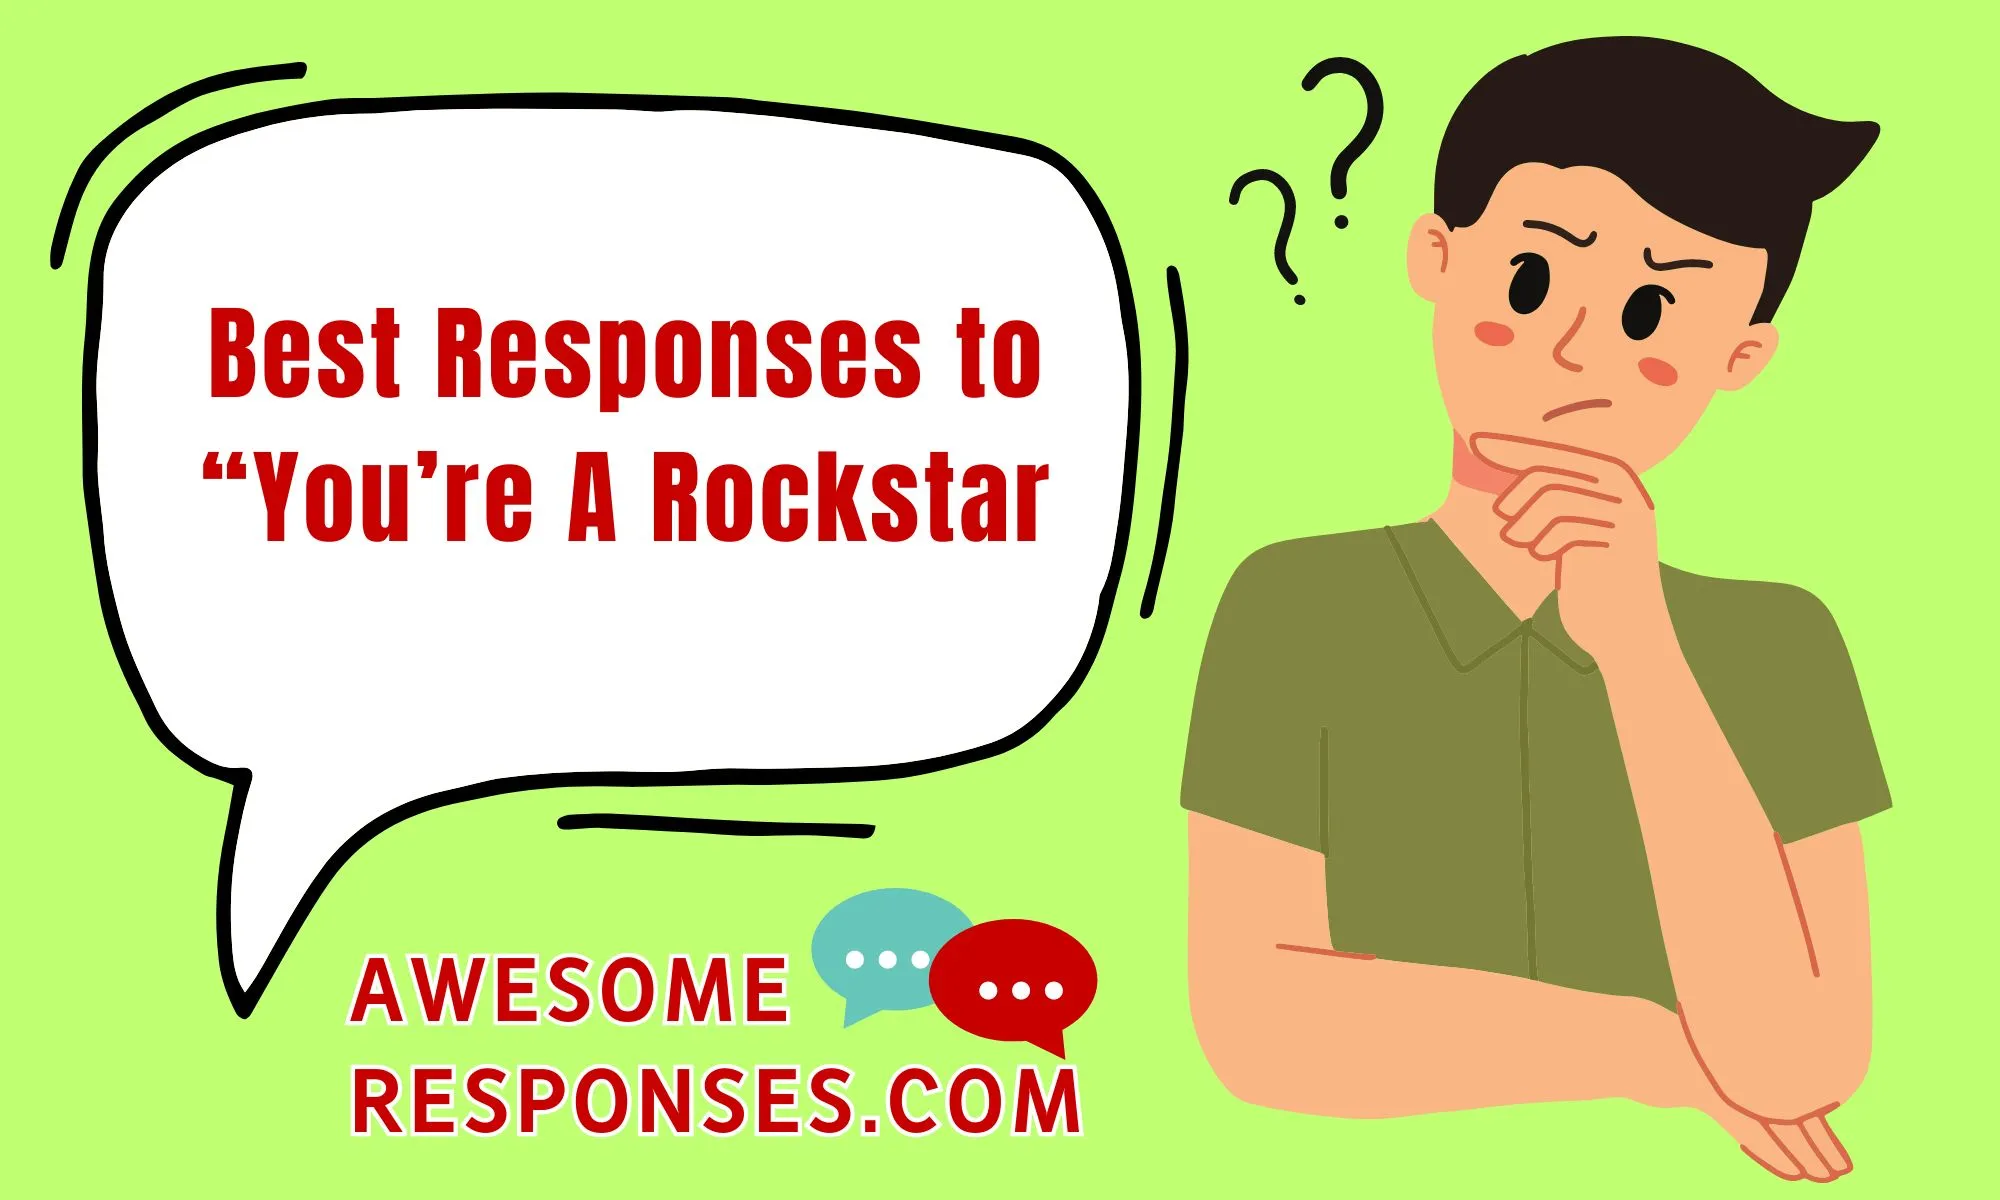 Best Responses to “You’re A Rockstar”